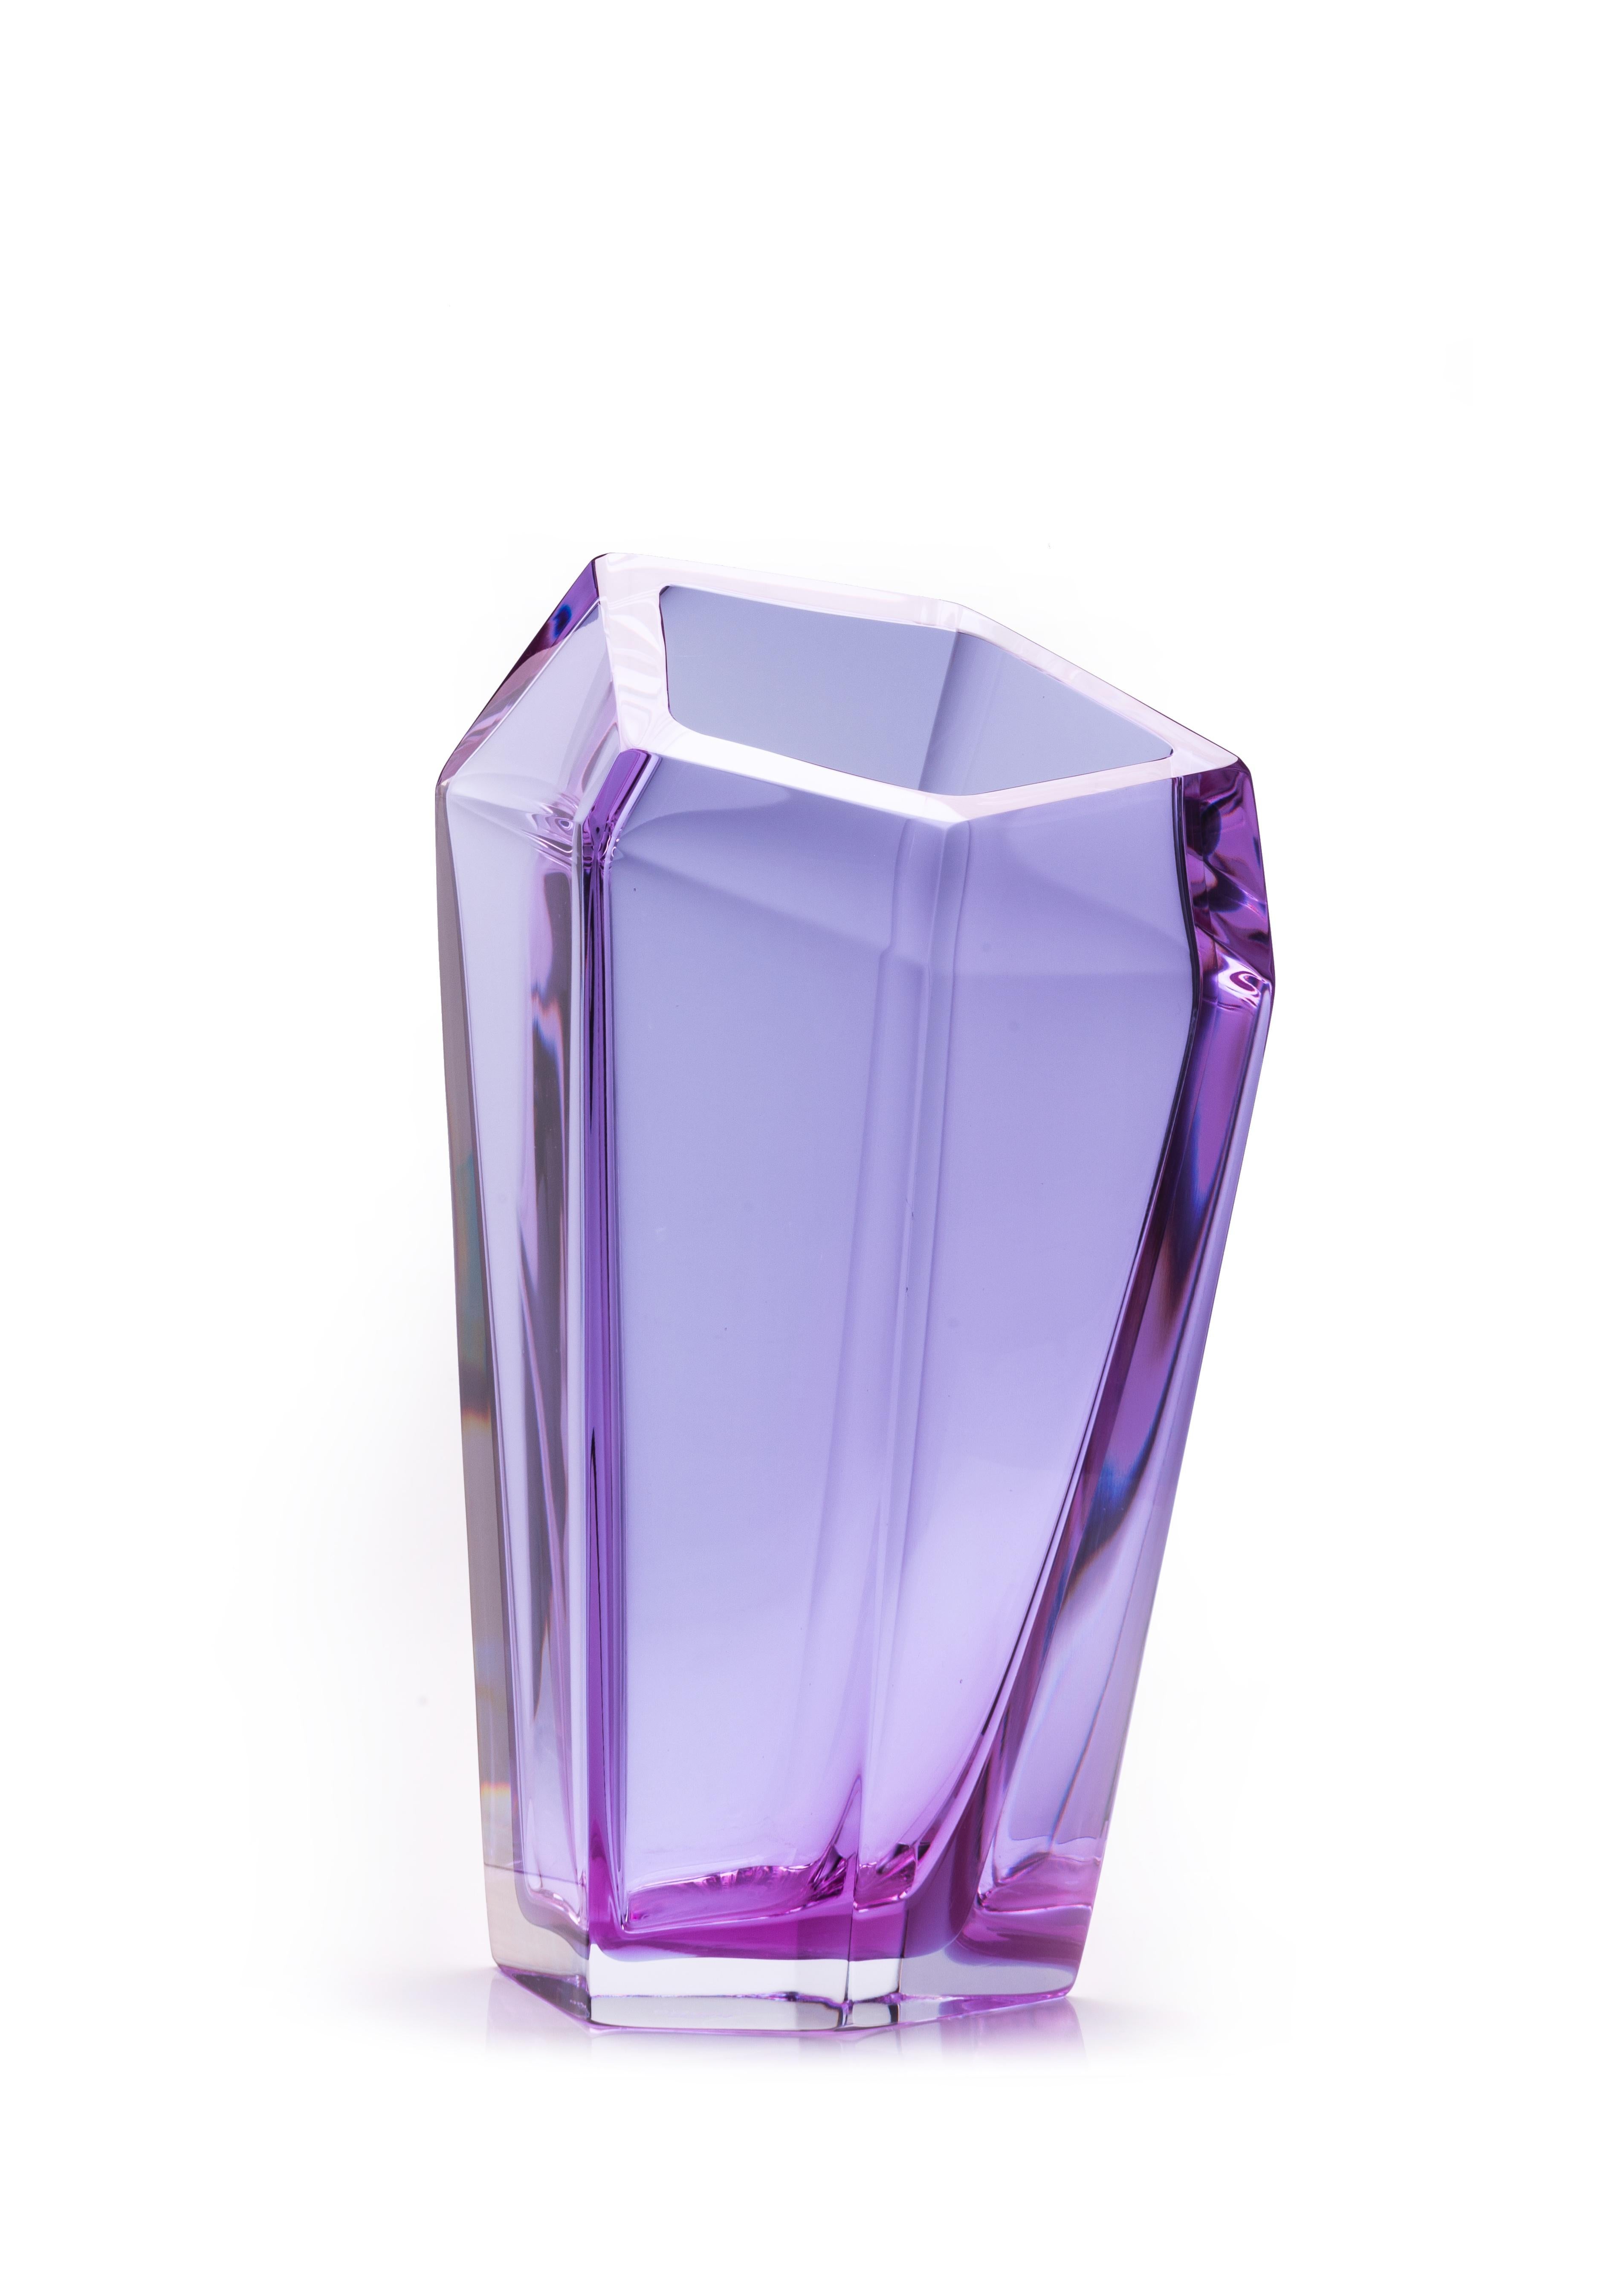 Kastle vase, Murano glass, by Karim Rashid, 21st century.
Karim Rashid has conceived for Purho a mini collection of bowls and vases characterized by their faceted, structural form and abstract elegance. Irresistible because of the unusual and